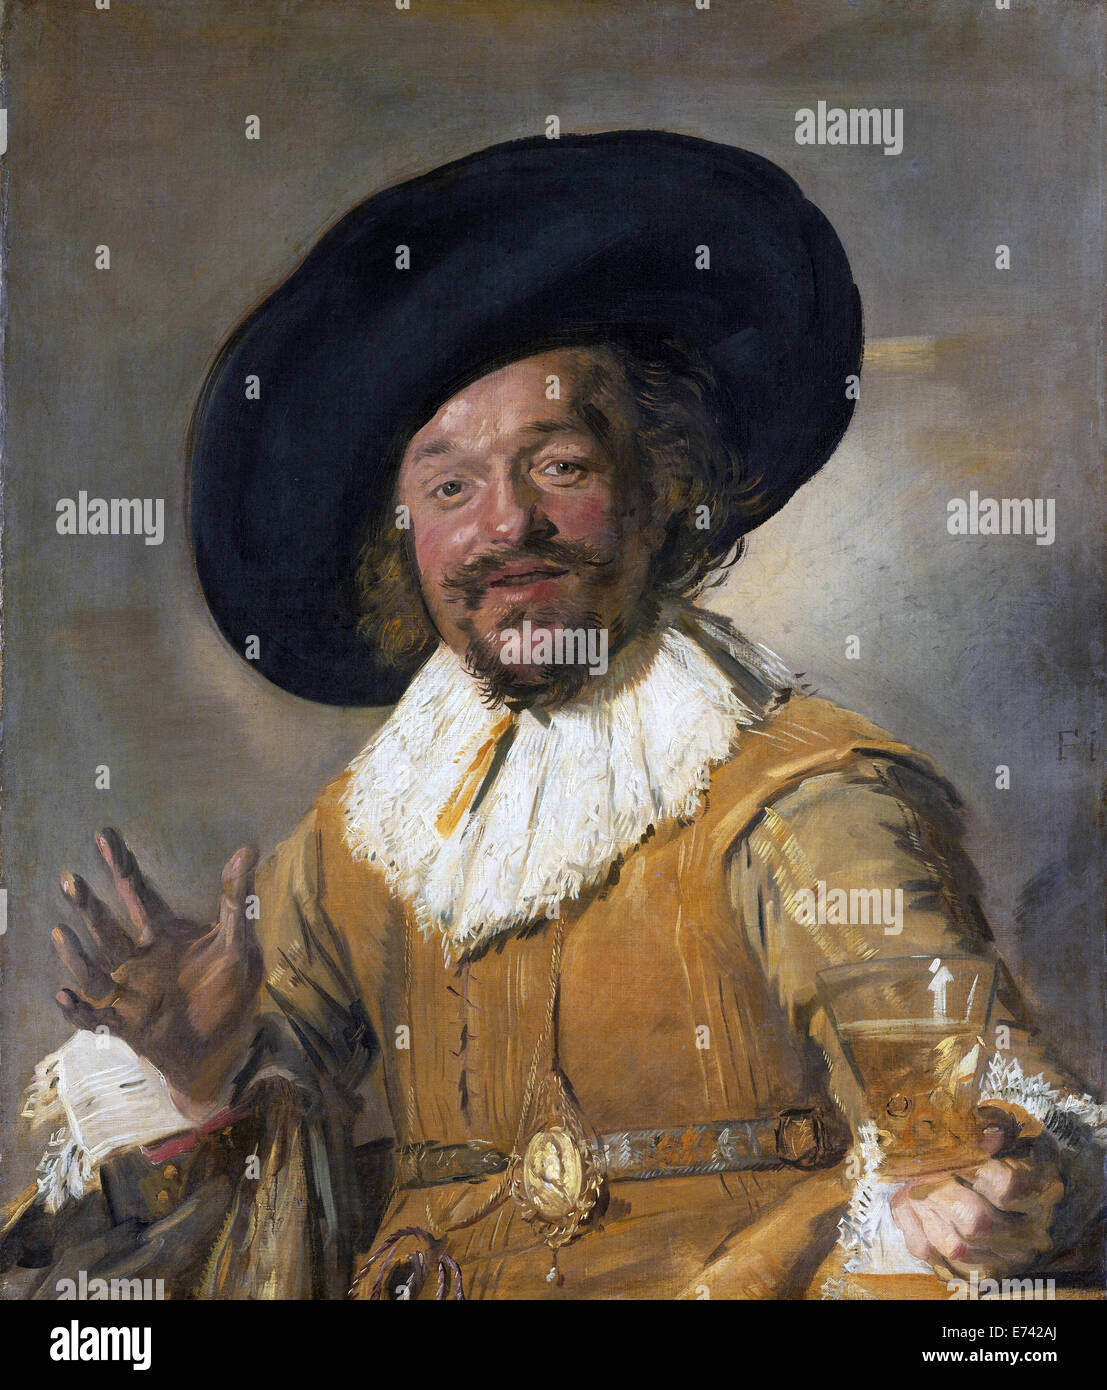 Militiaman Holding a Berkemeyer Known as the ‘Merry Drinker’ - by Frans Hals 1628 - 1630 Stock Photo